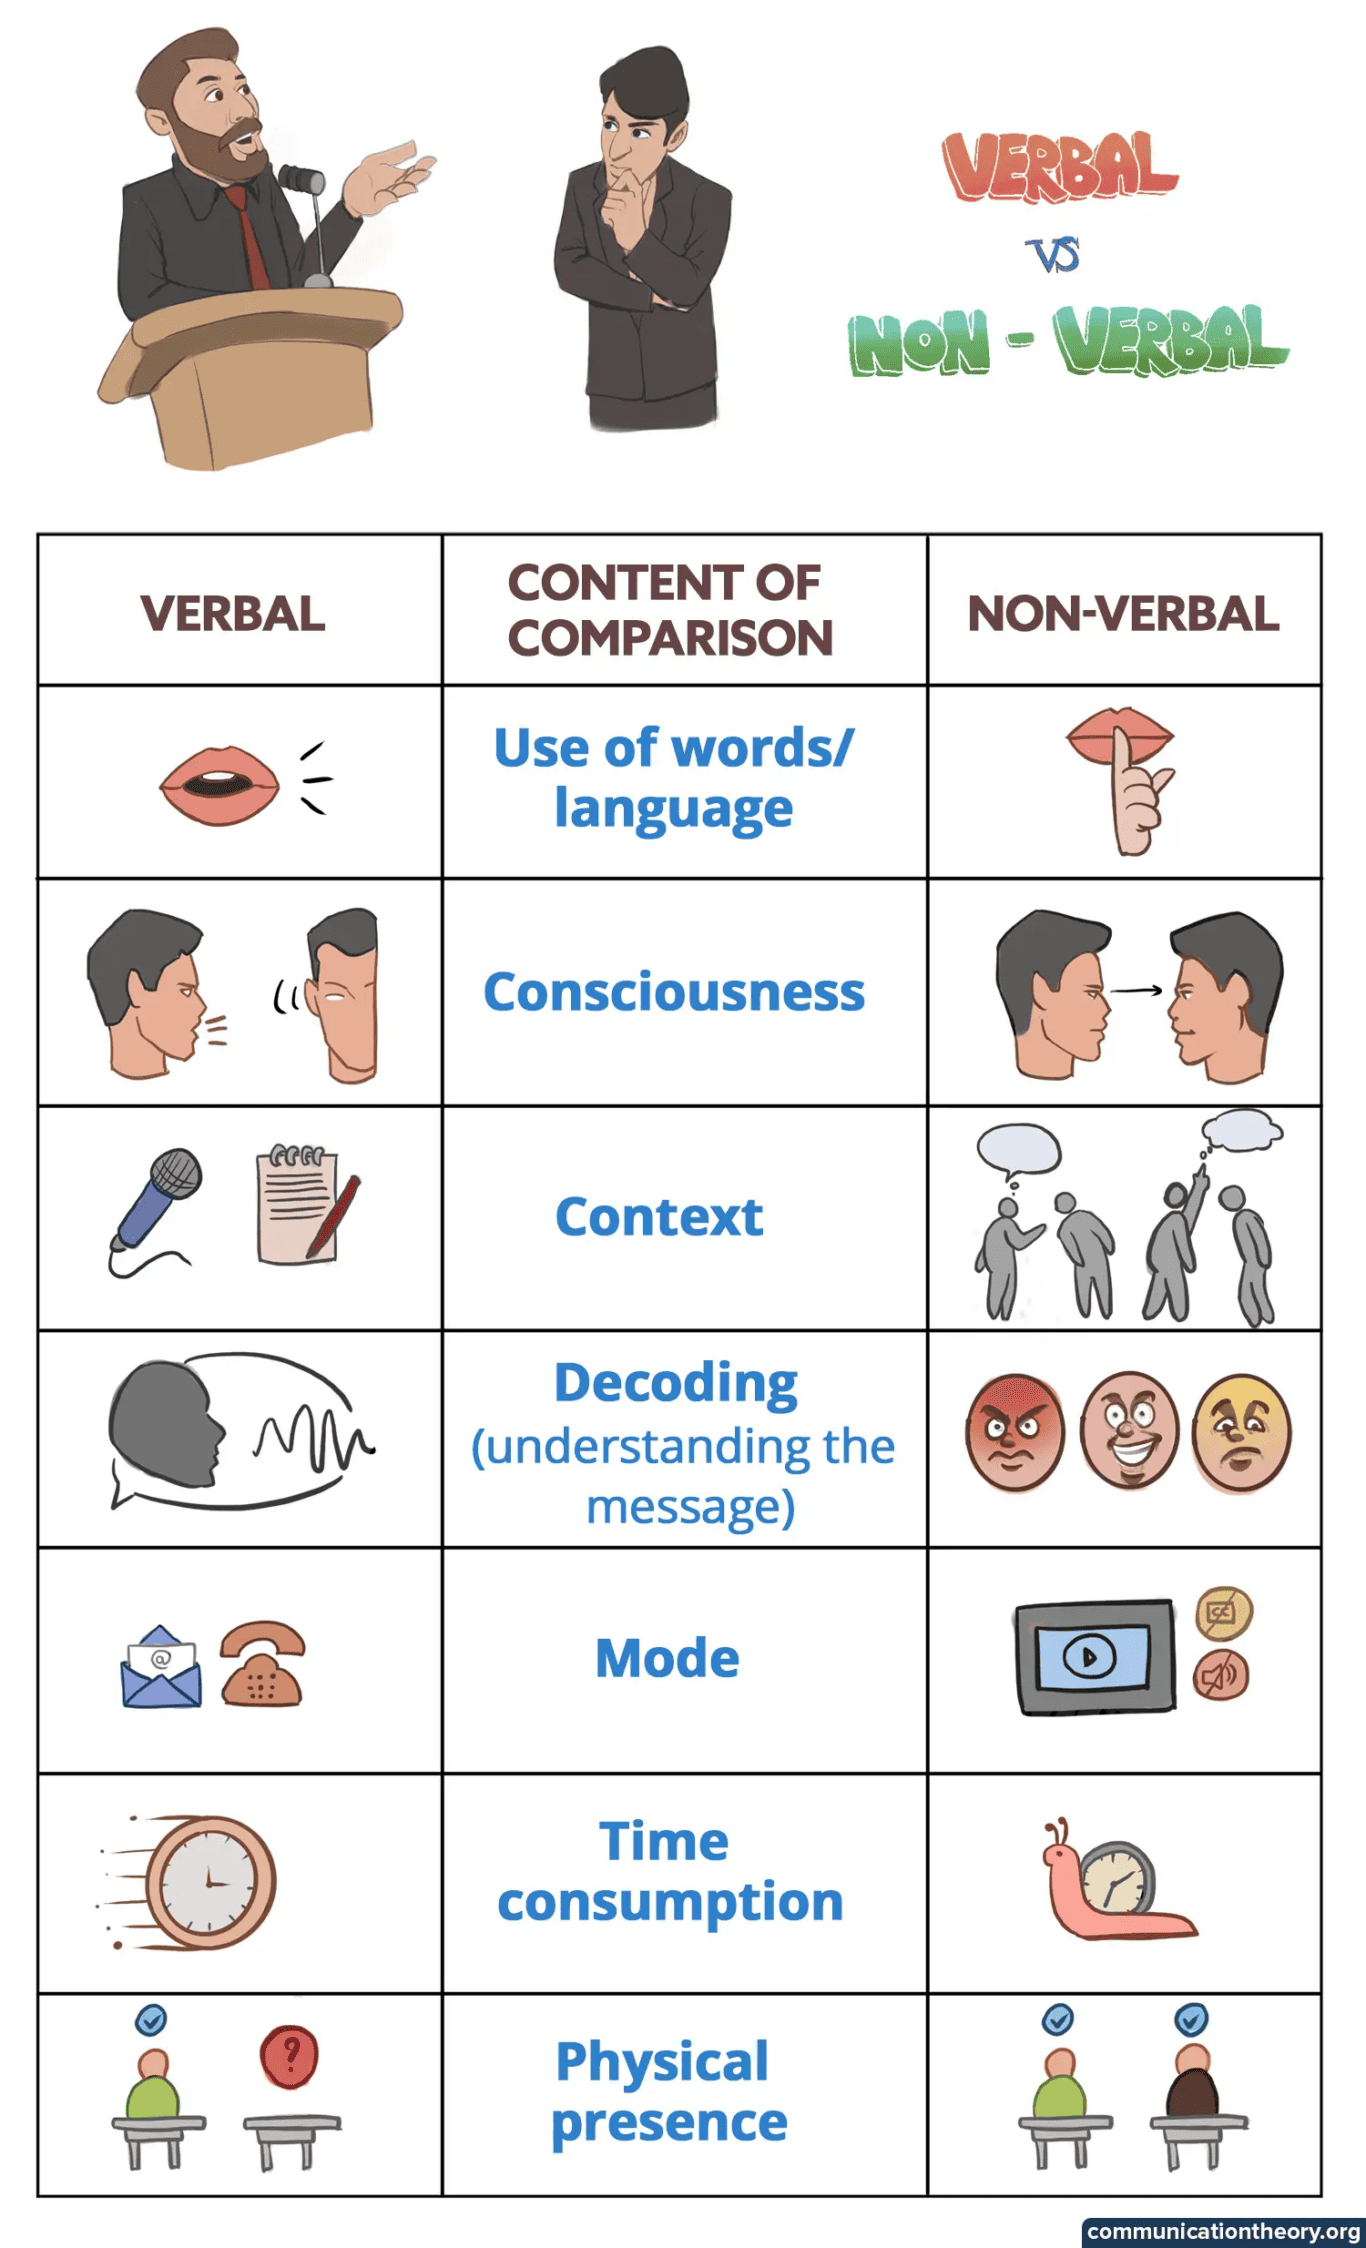 A chart breaking down visualizations and examples of verbal vs. non-verbal communication. Callouts include: use of language/words, consciousness, context, decoding, mode, time consumption, physical presence.